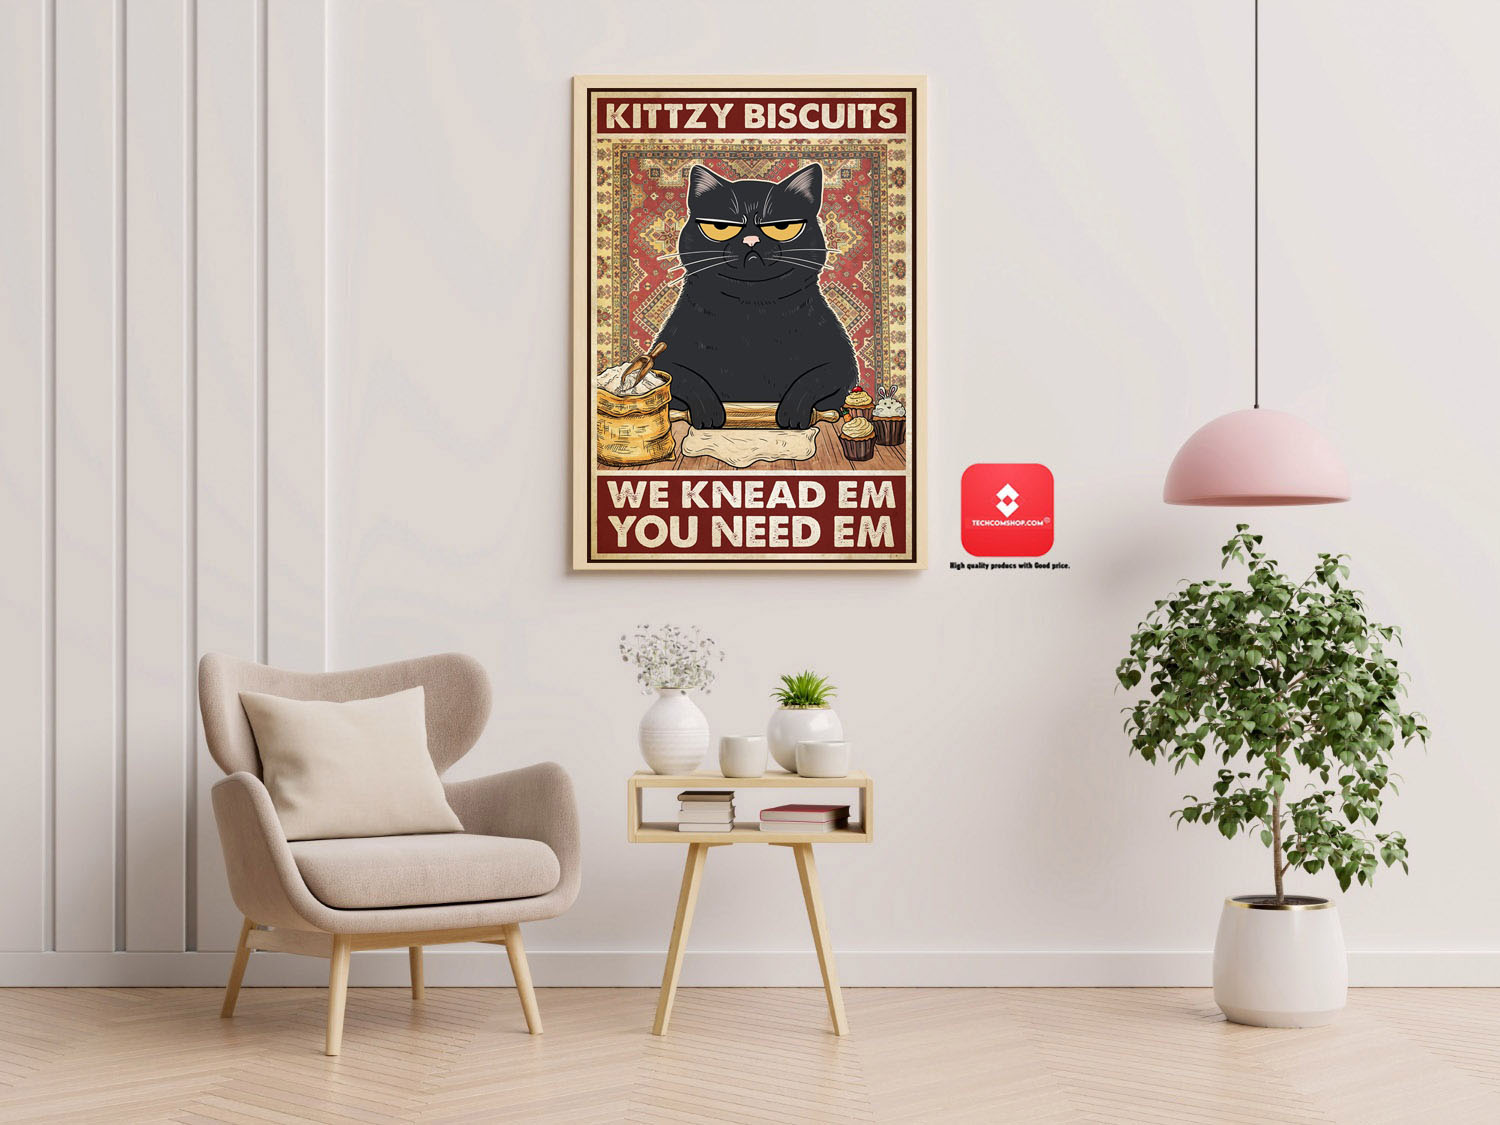 Baker Kittzy biscuits we knead em you need em poster